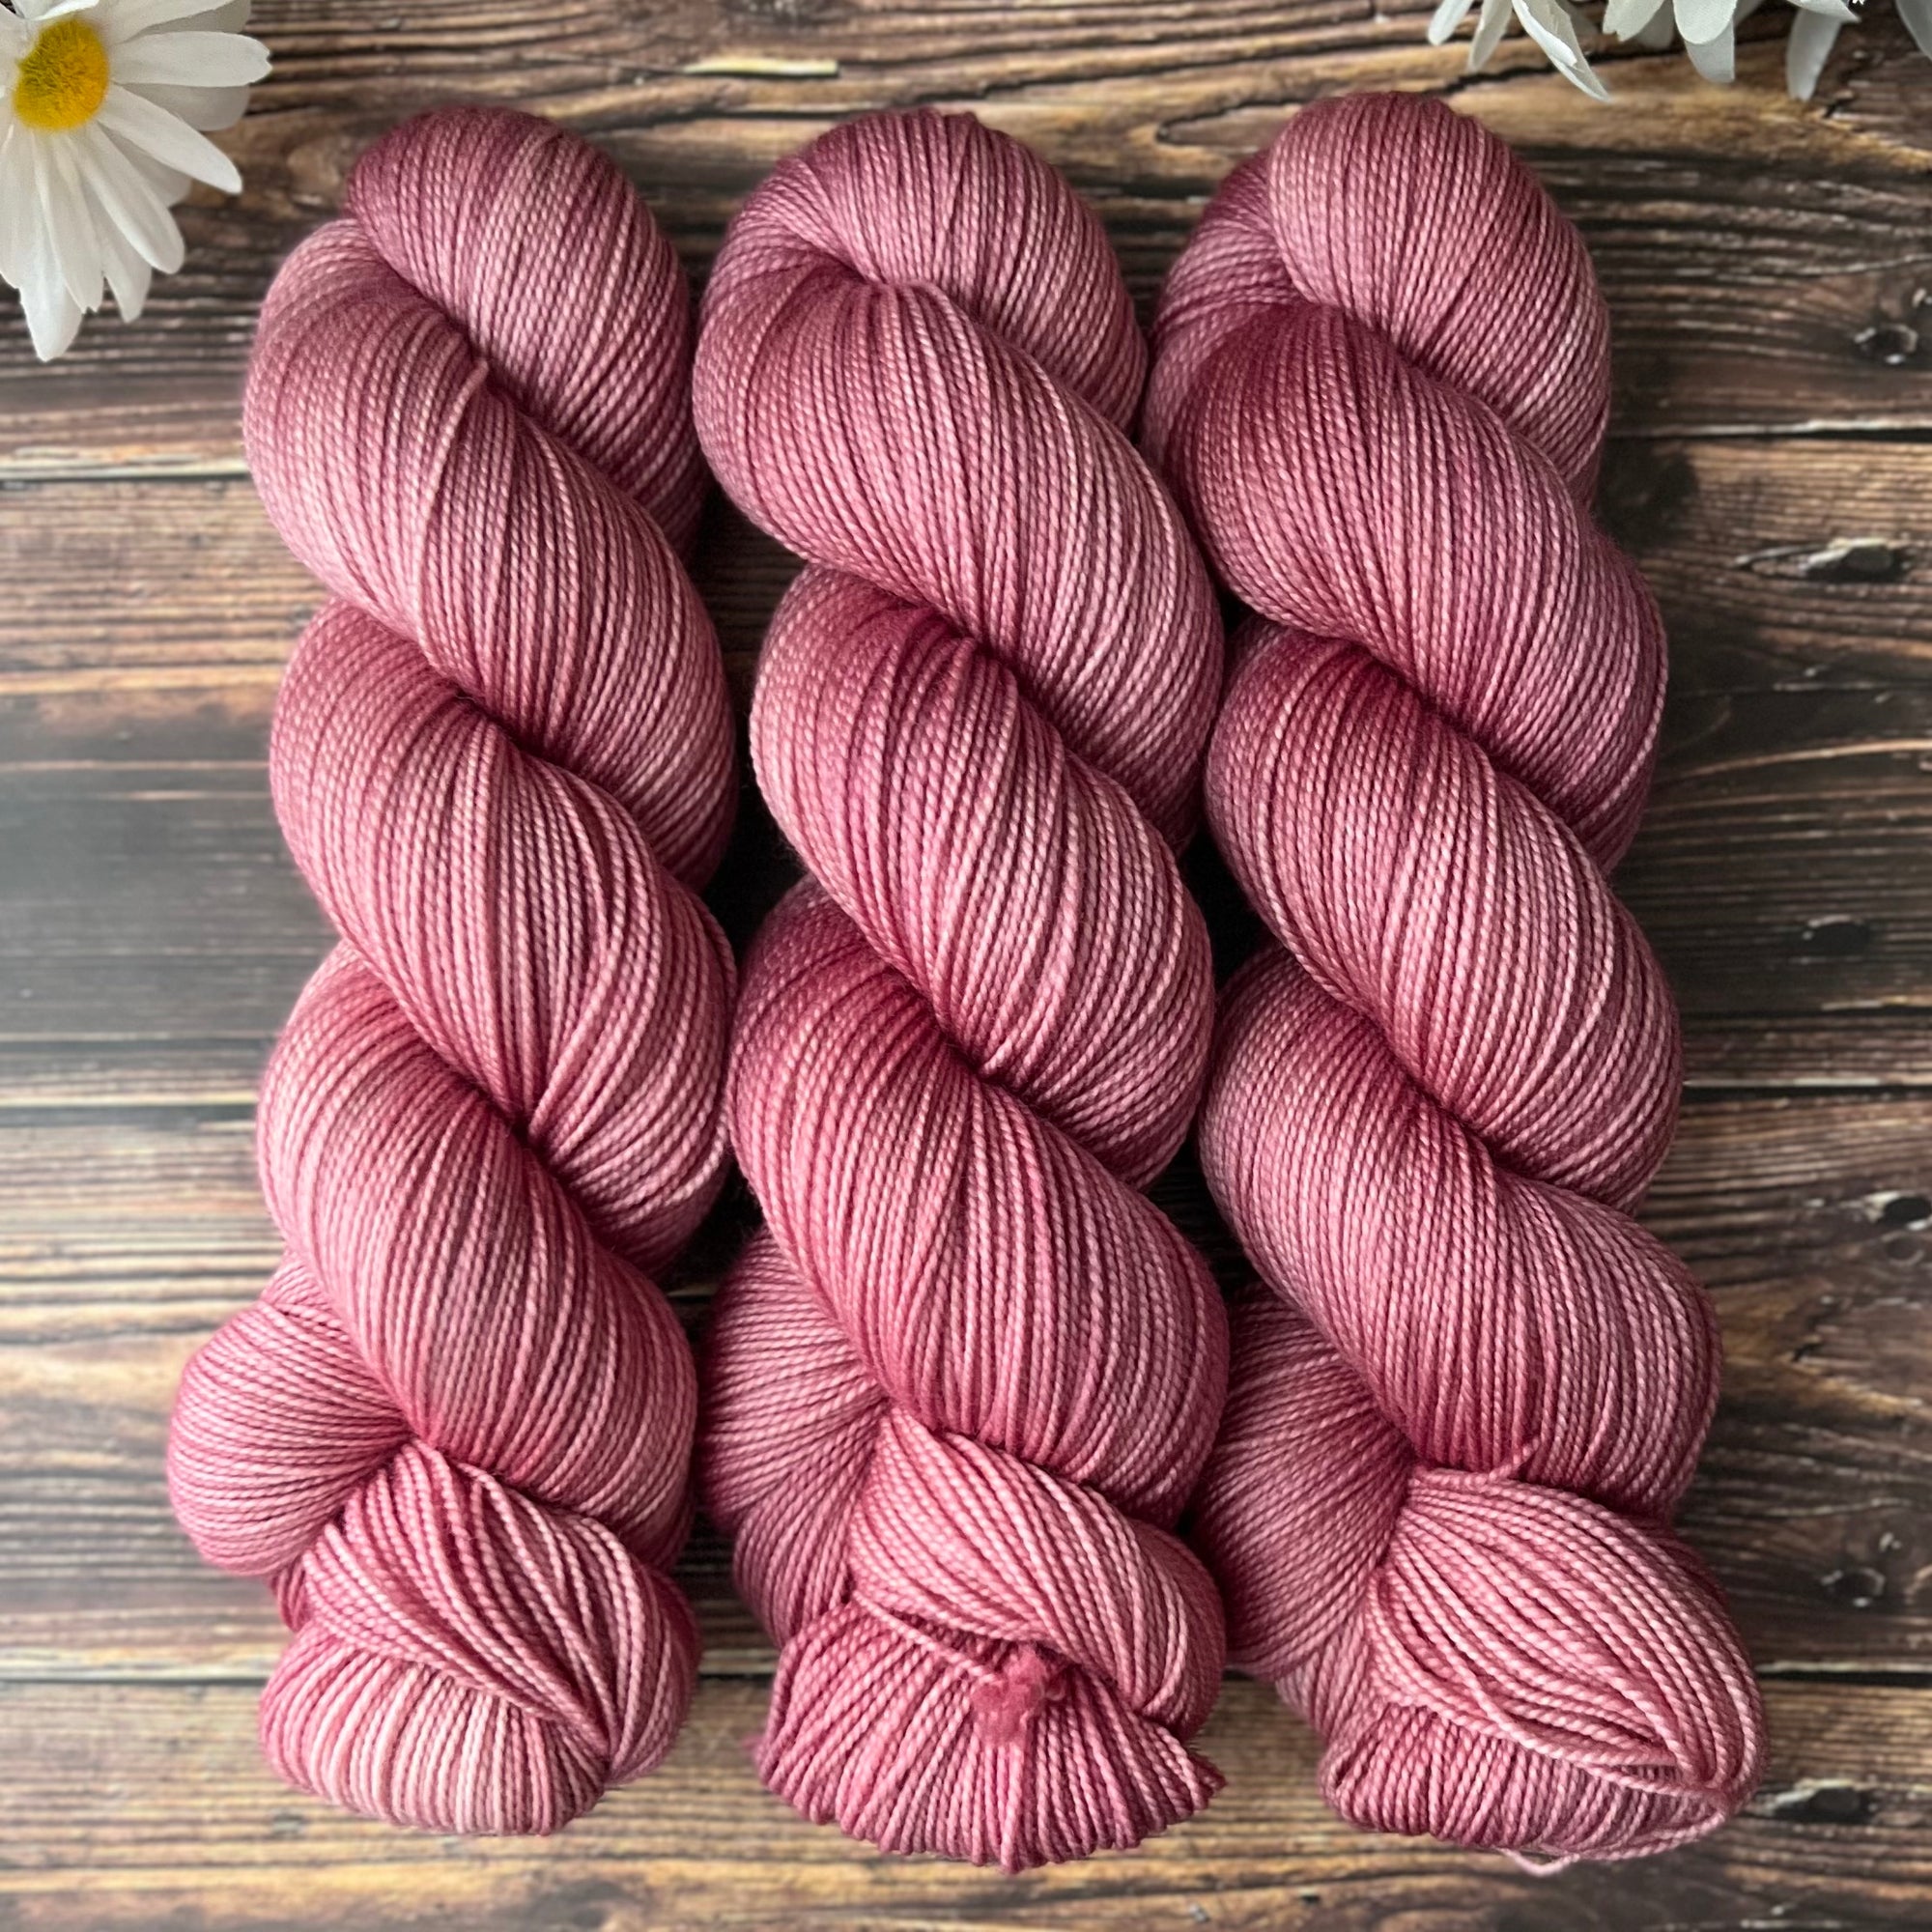 "Young at Heart" Hand-dyed Yarn